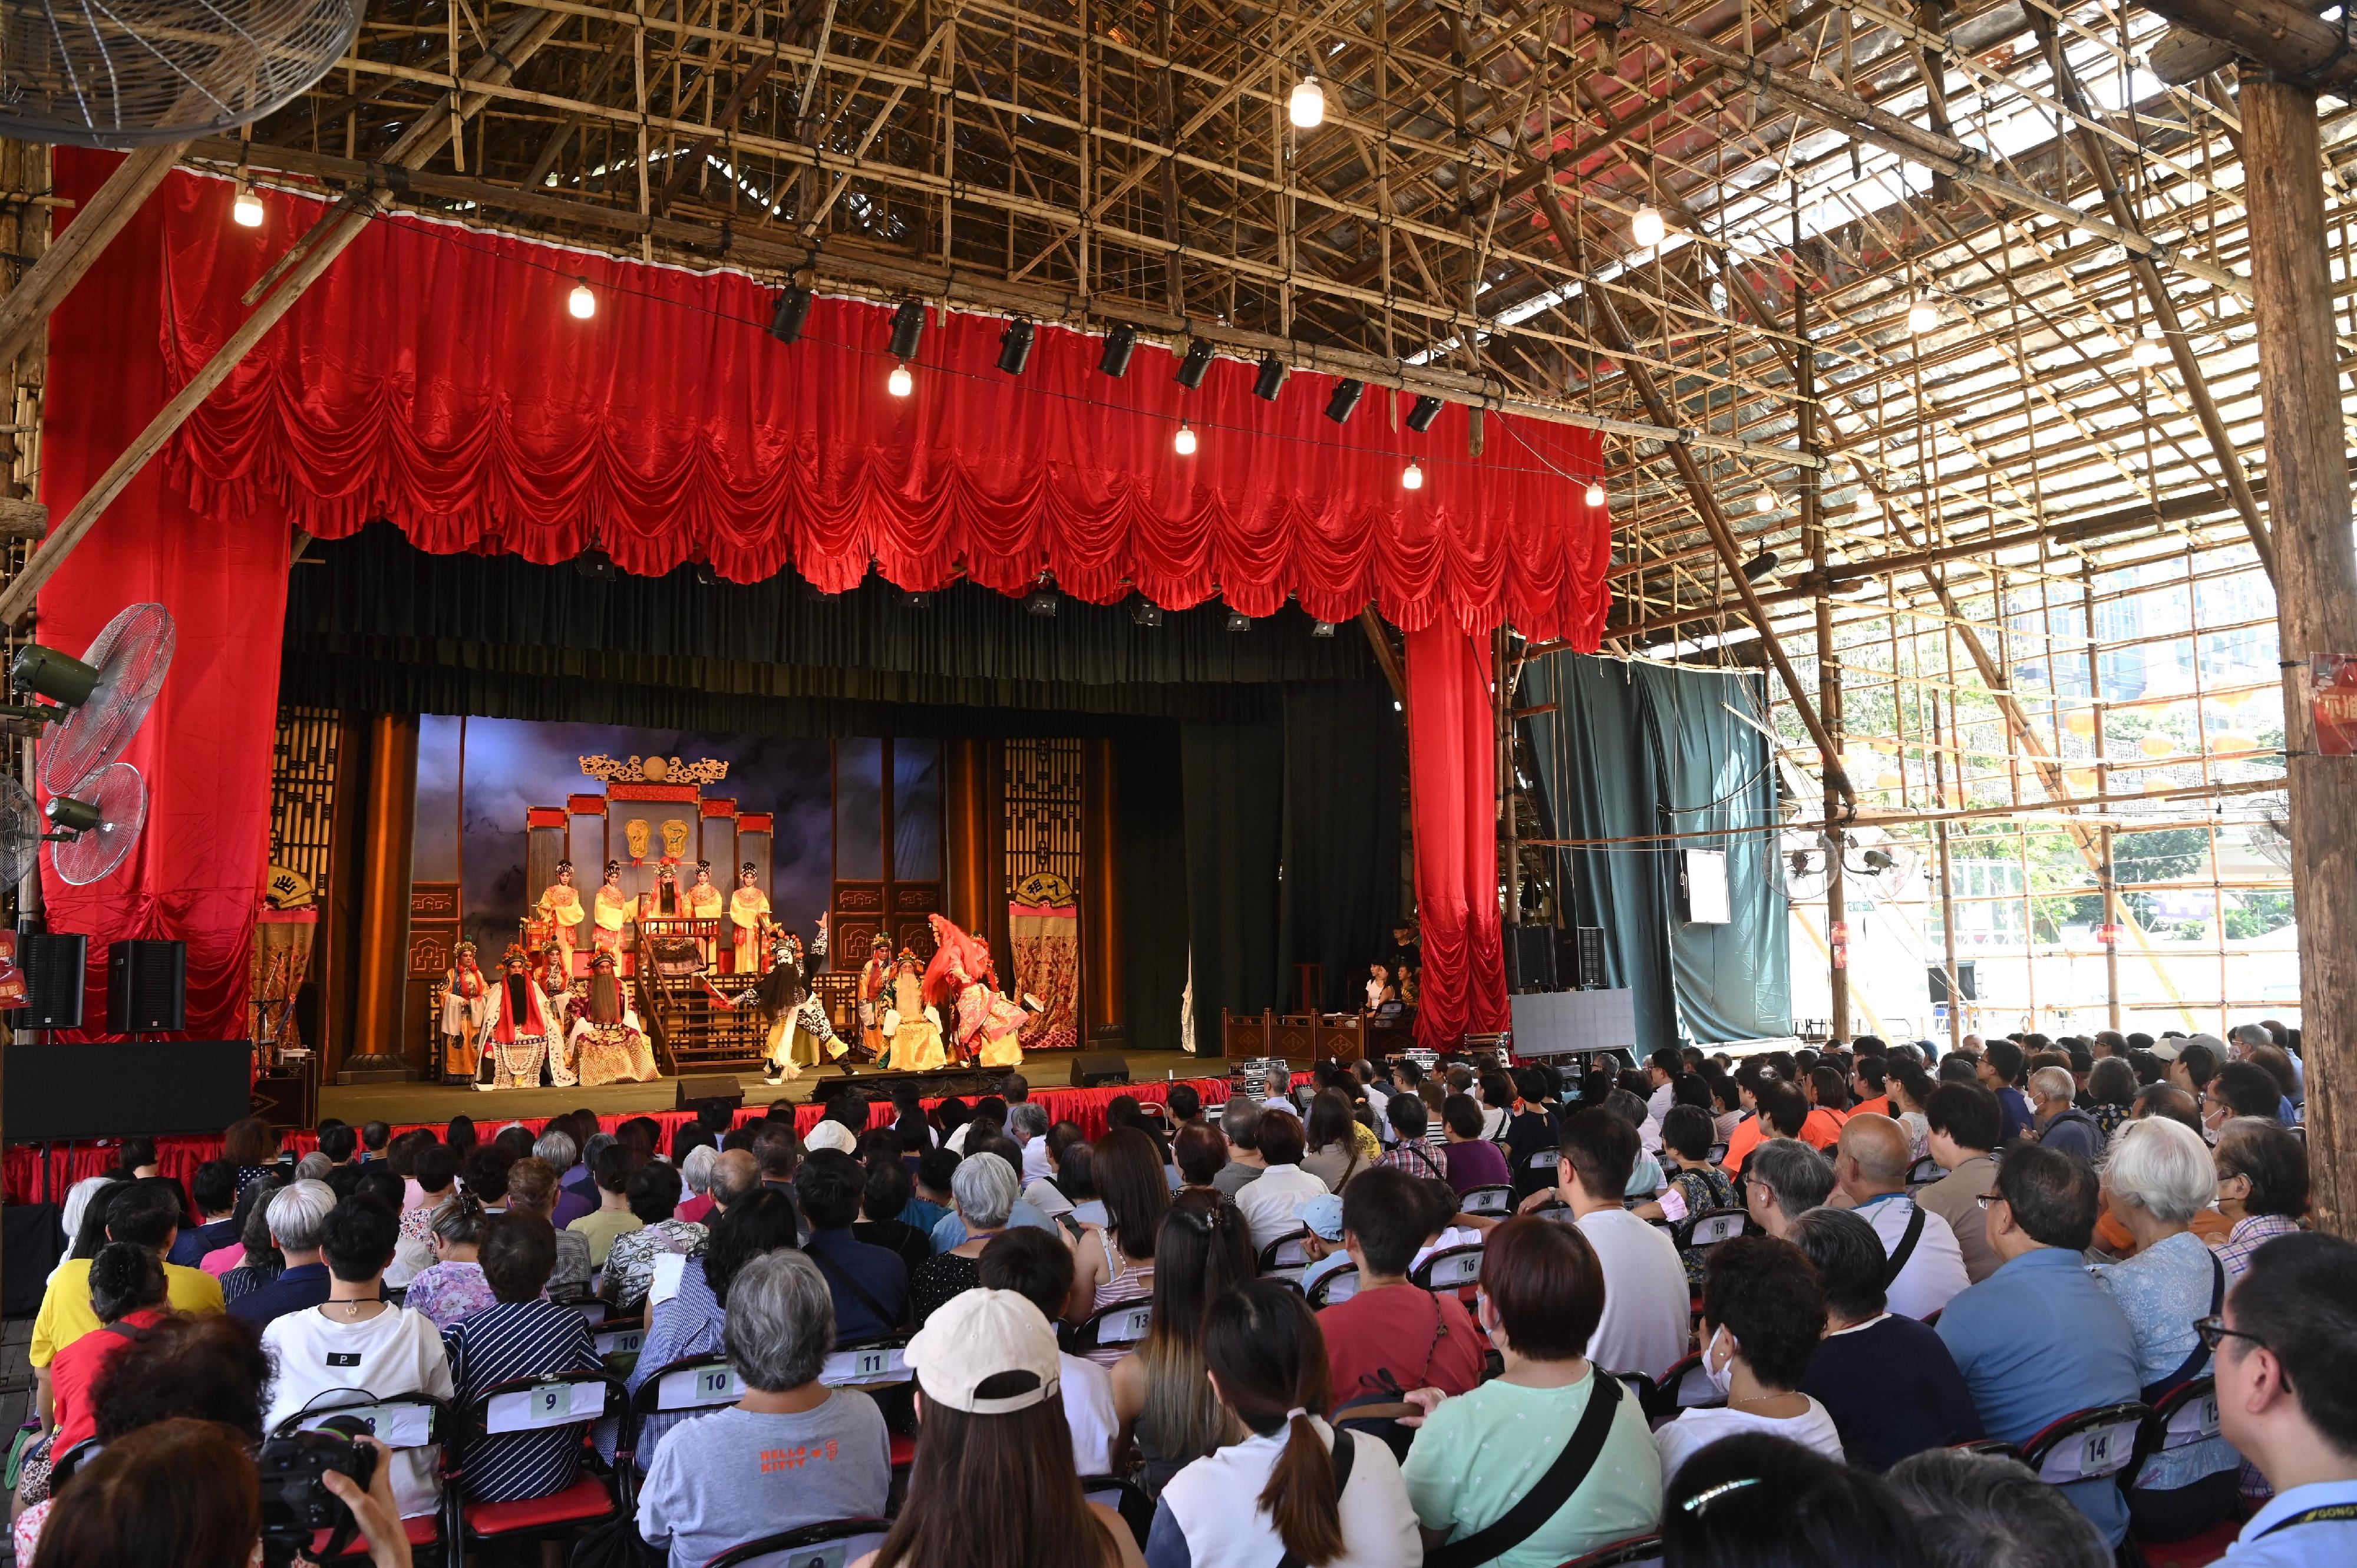 The grand finale of this year's Chinese Opera Festival, "Bless This Land - Cantonese Opera Showcase under the Bamboo Theatre at Victoria Park", opens today (September 23). Photo shows audiences in the bamboo theatre watching stage performance.